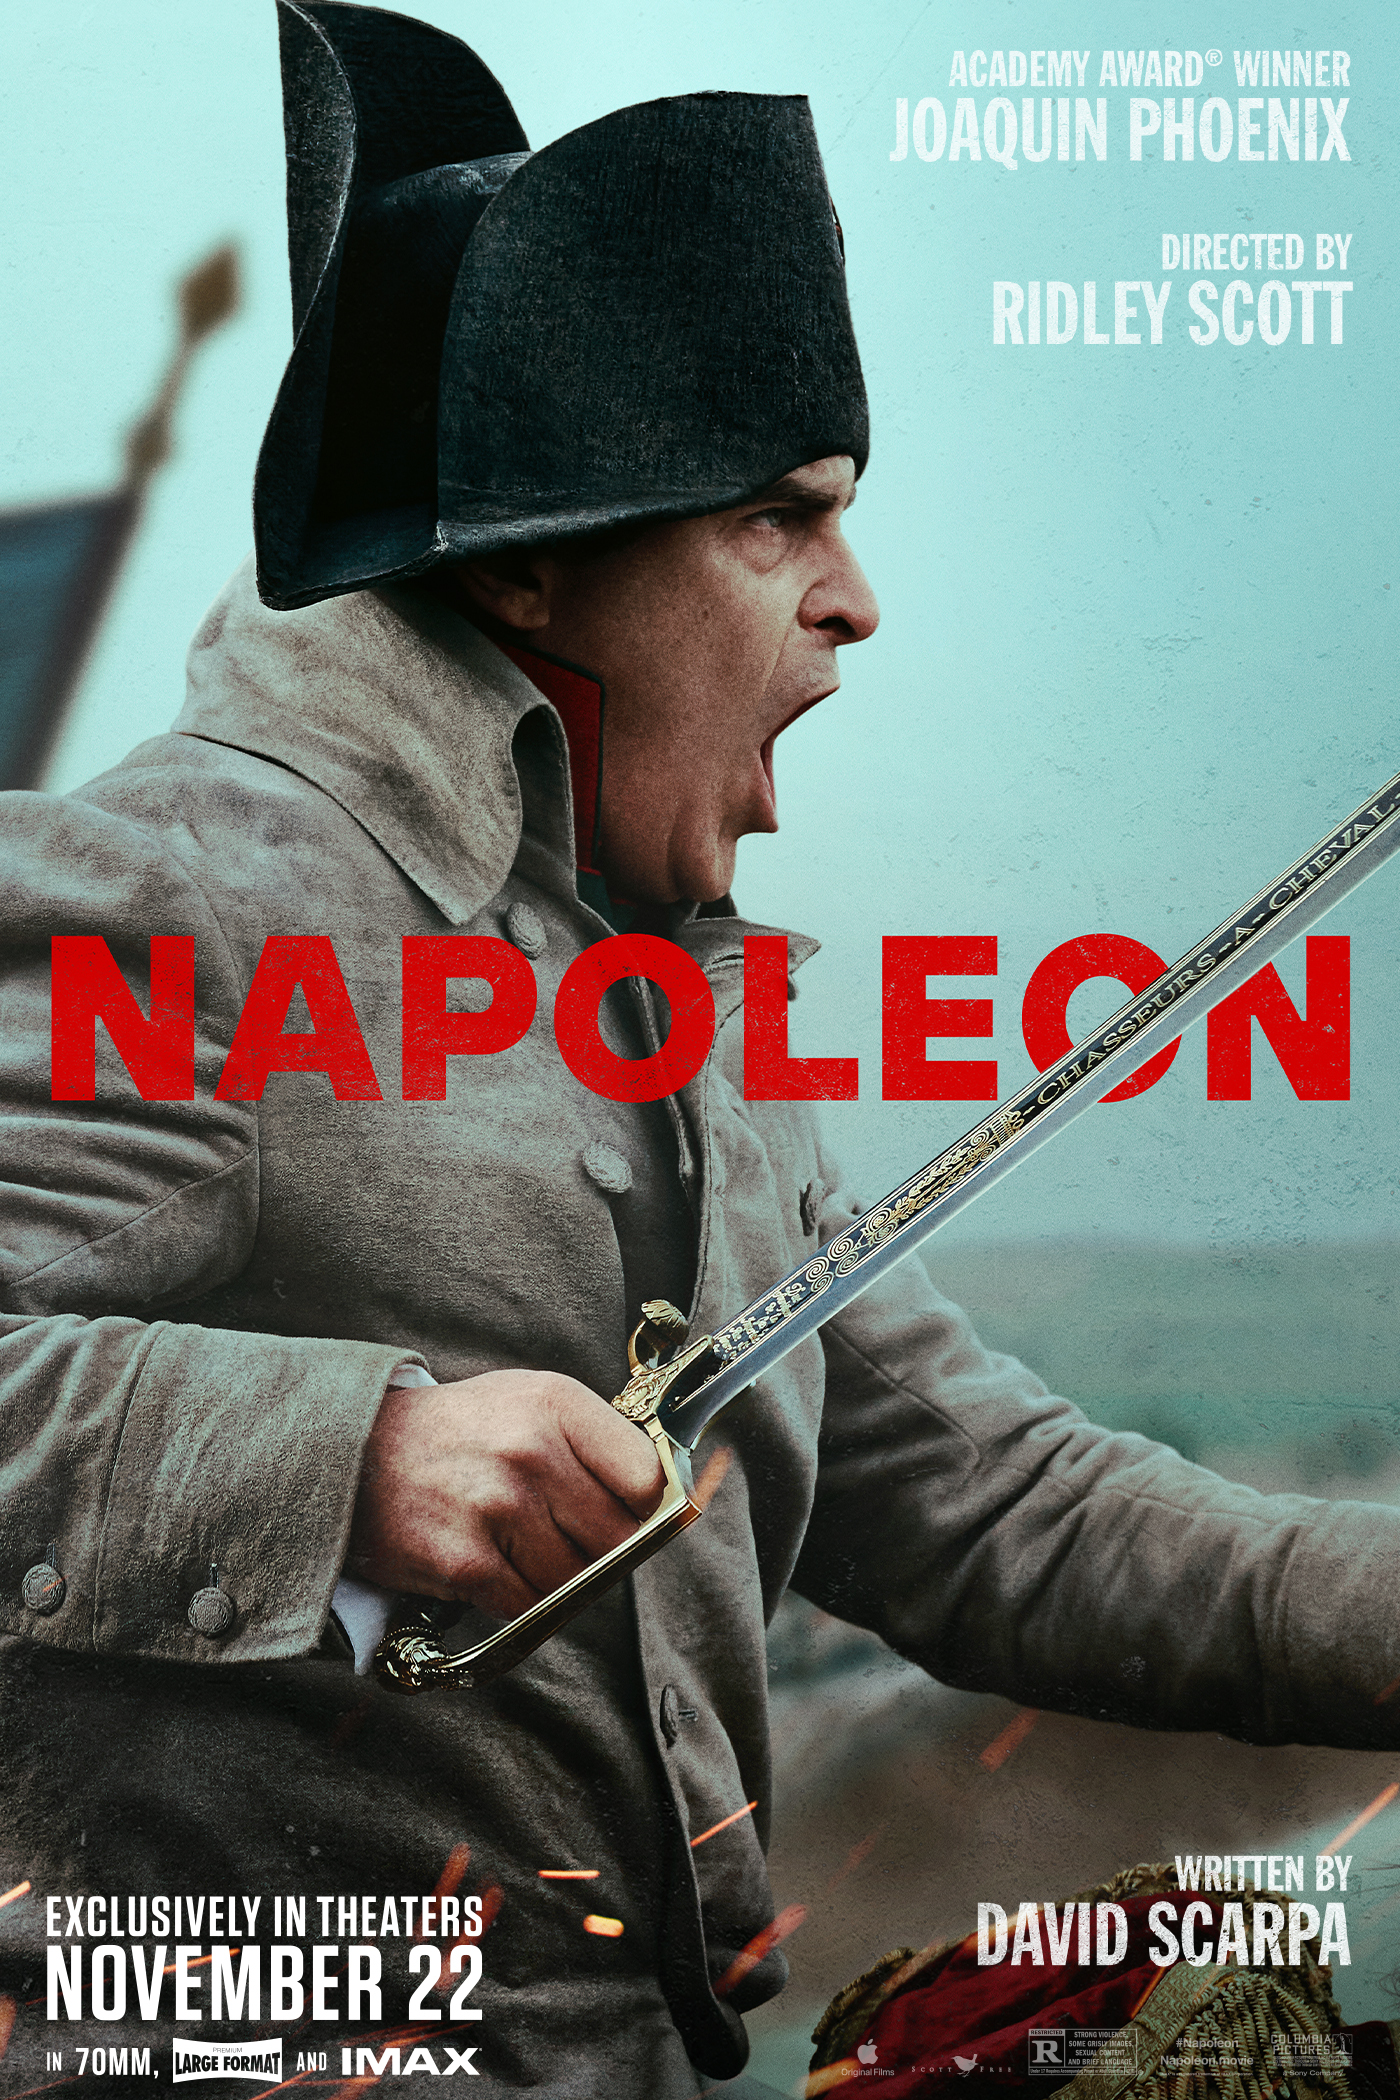 An profile image of Joaquin Phoenix, as Napoleon Bonaparte, charging forward with a sabre in hand. His face is fierce and focused as he appears to be yelling.